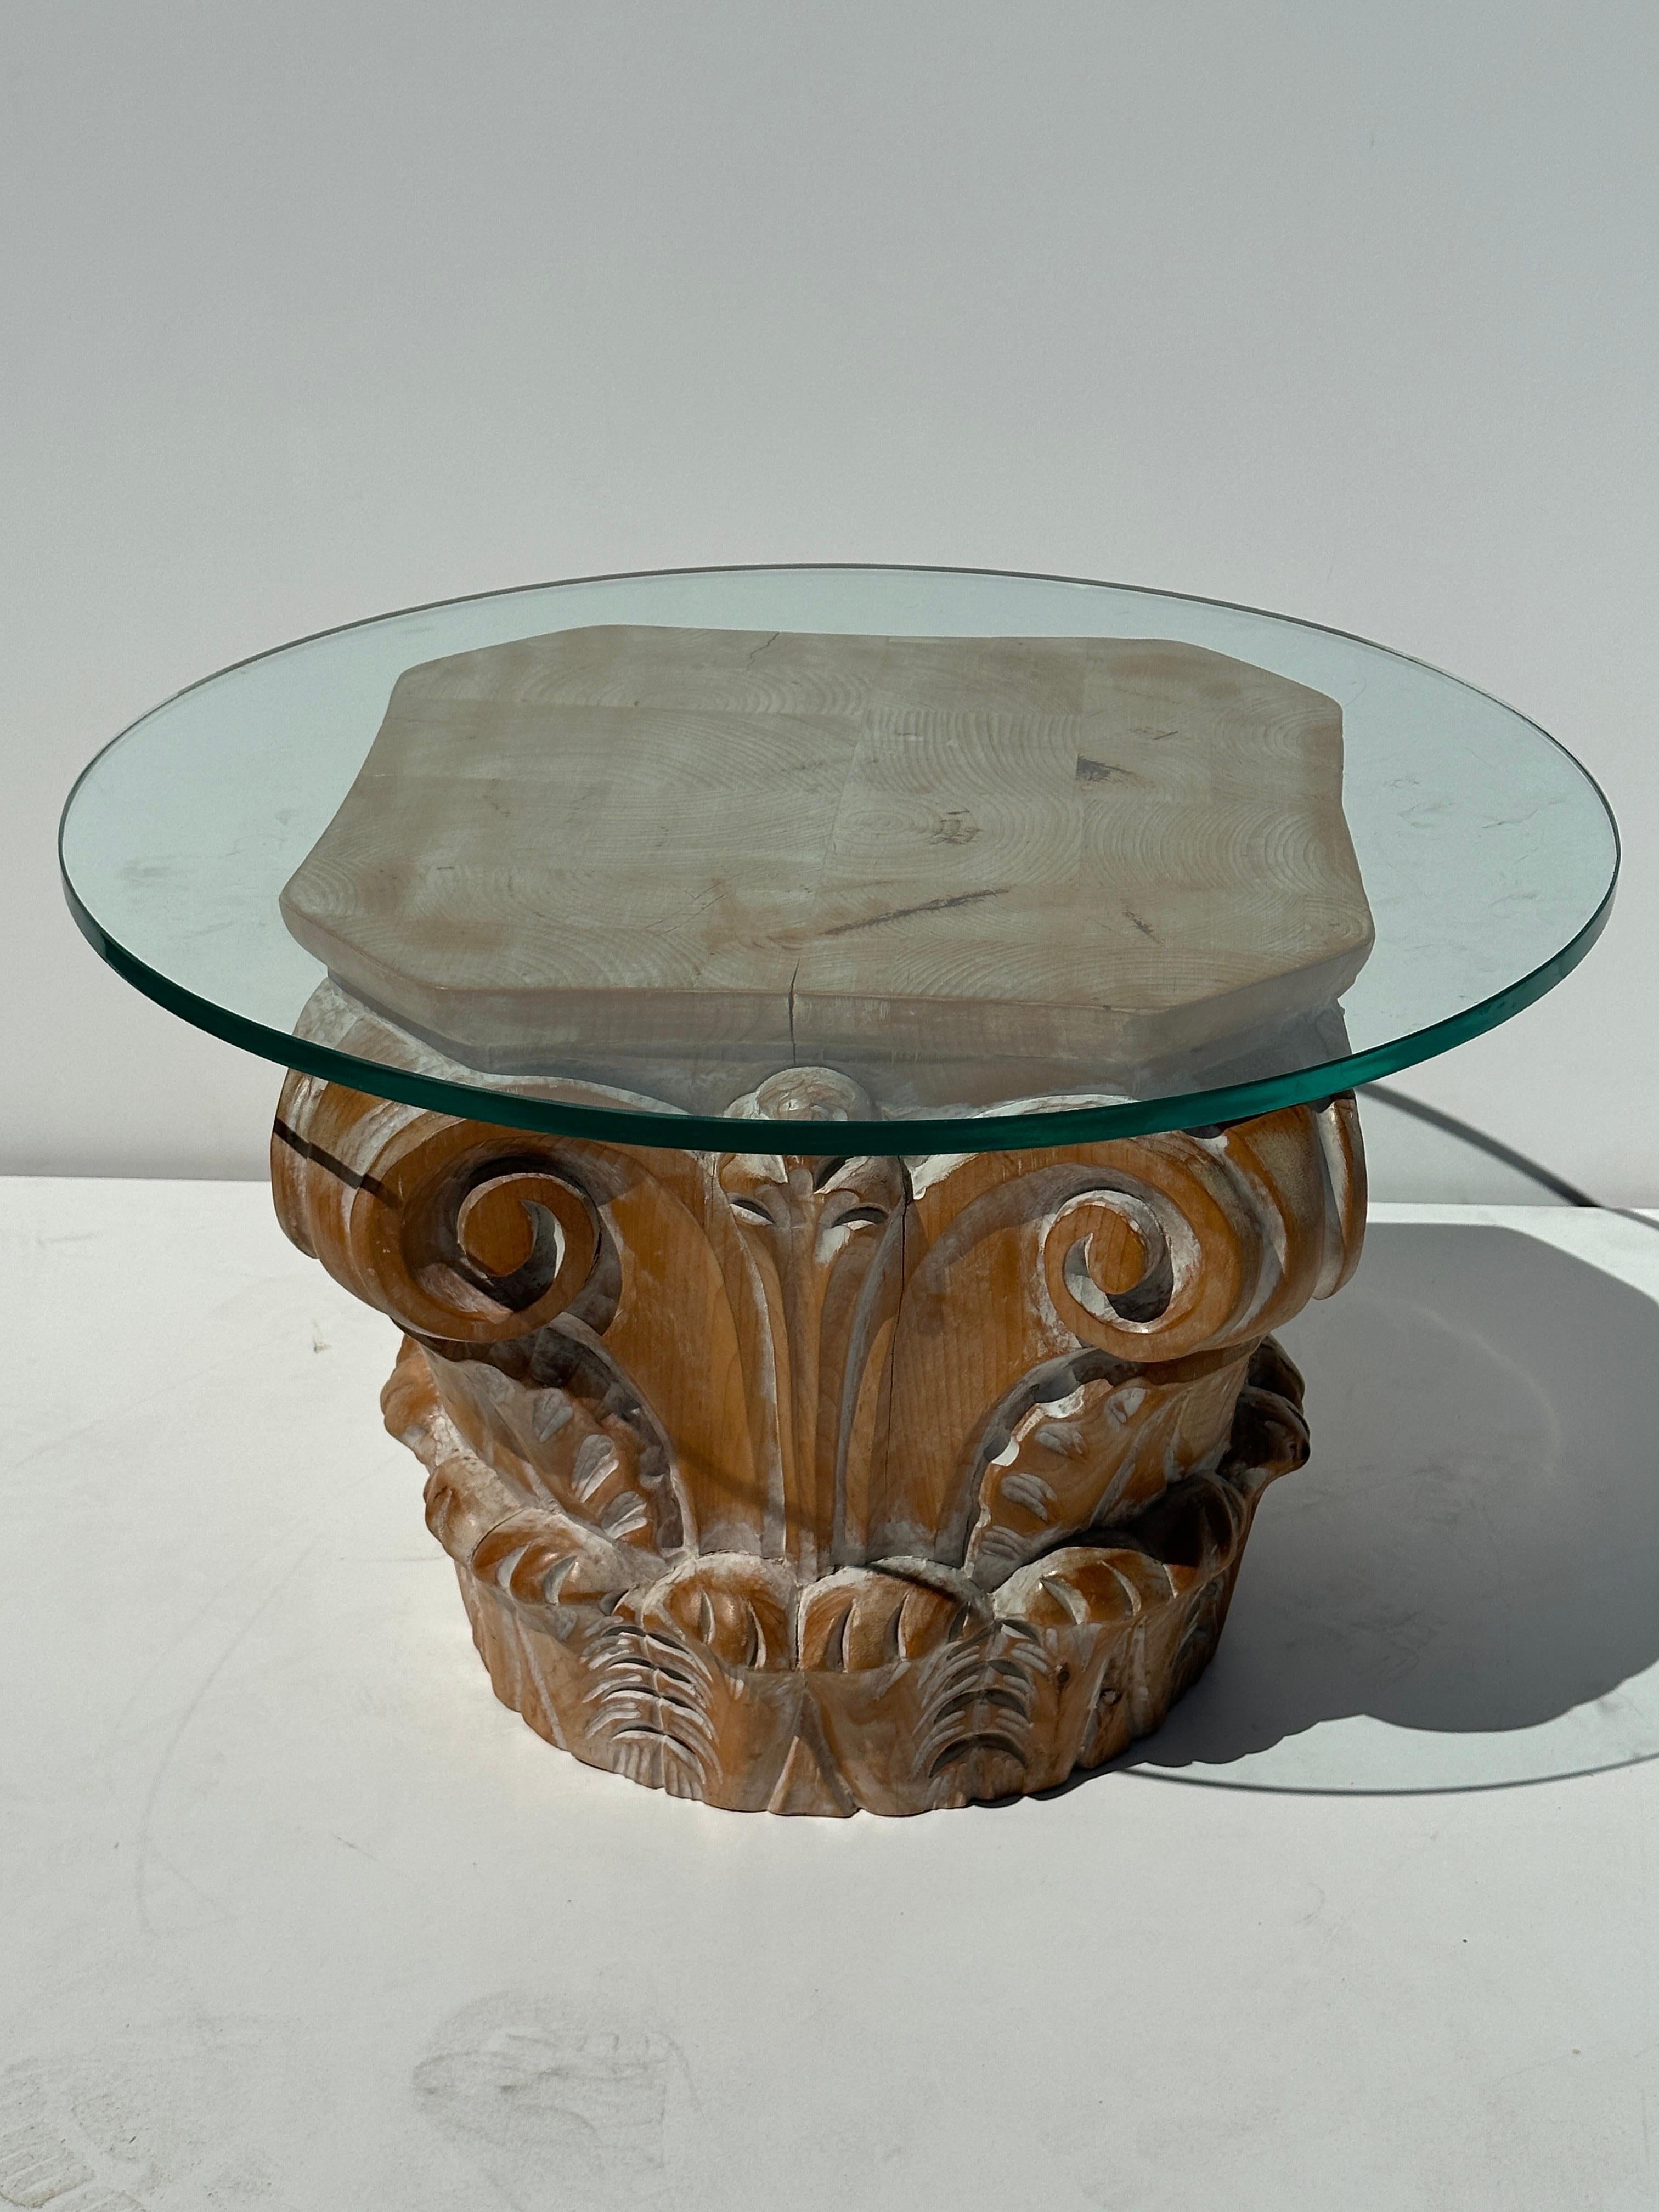 Corinthian capital occasional table carved in solid pine with white wash antique finish. Made in Italy. Glass top is 24